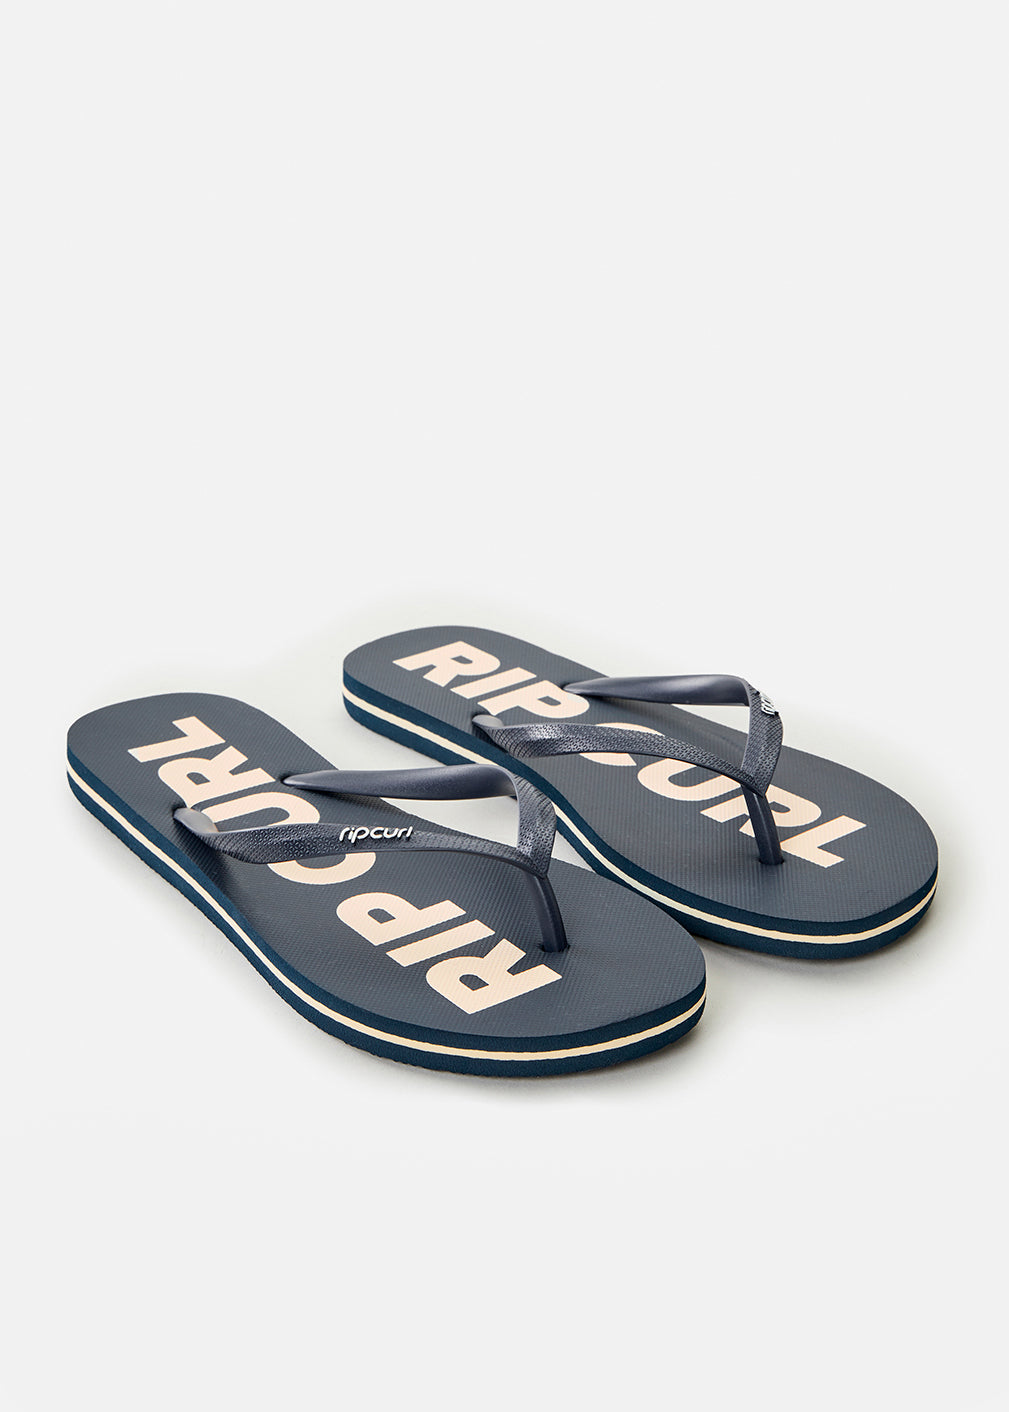 Classic Surf Flip-Flops by Rip Curl